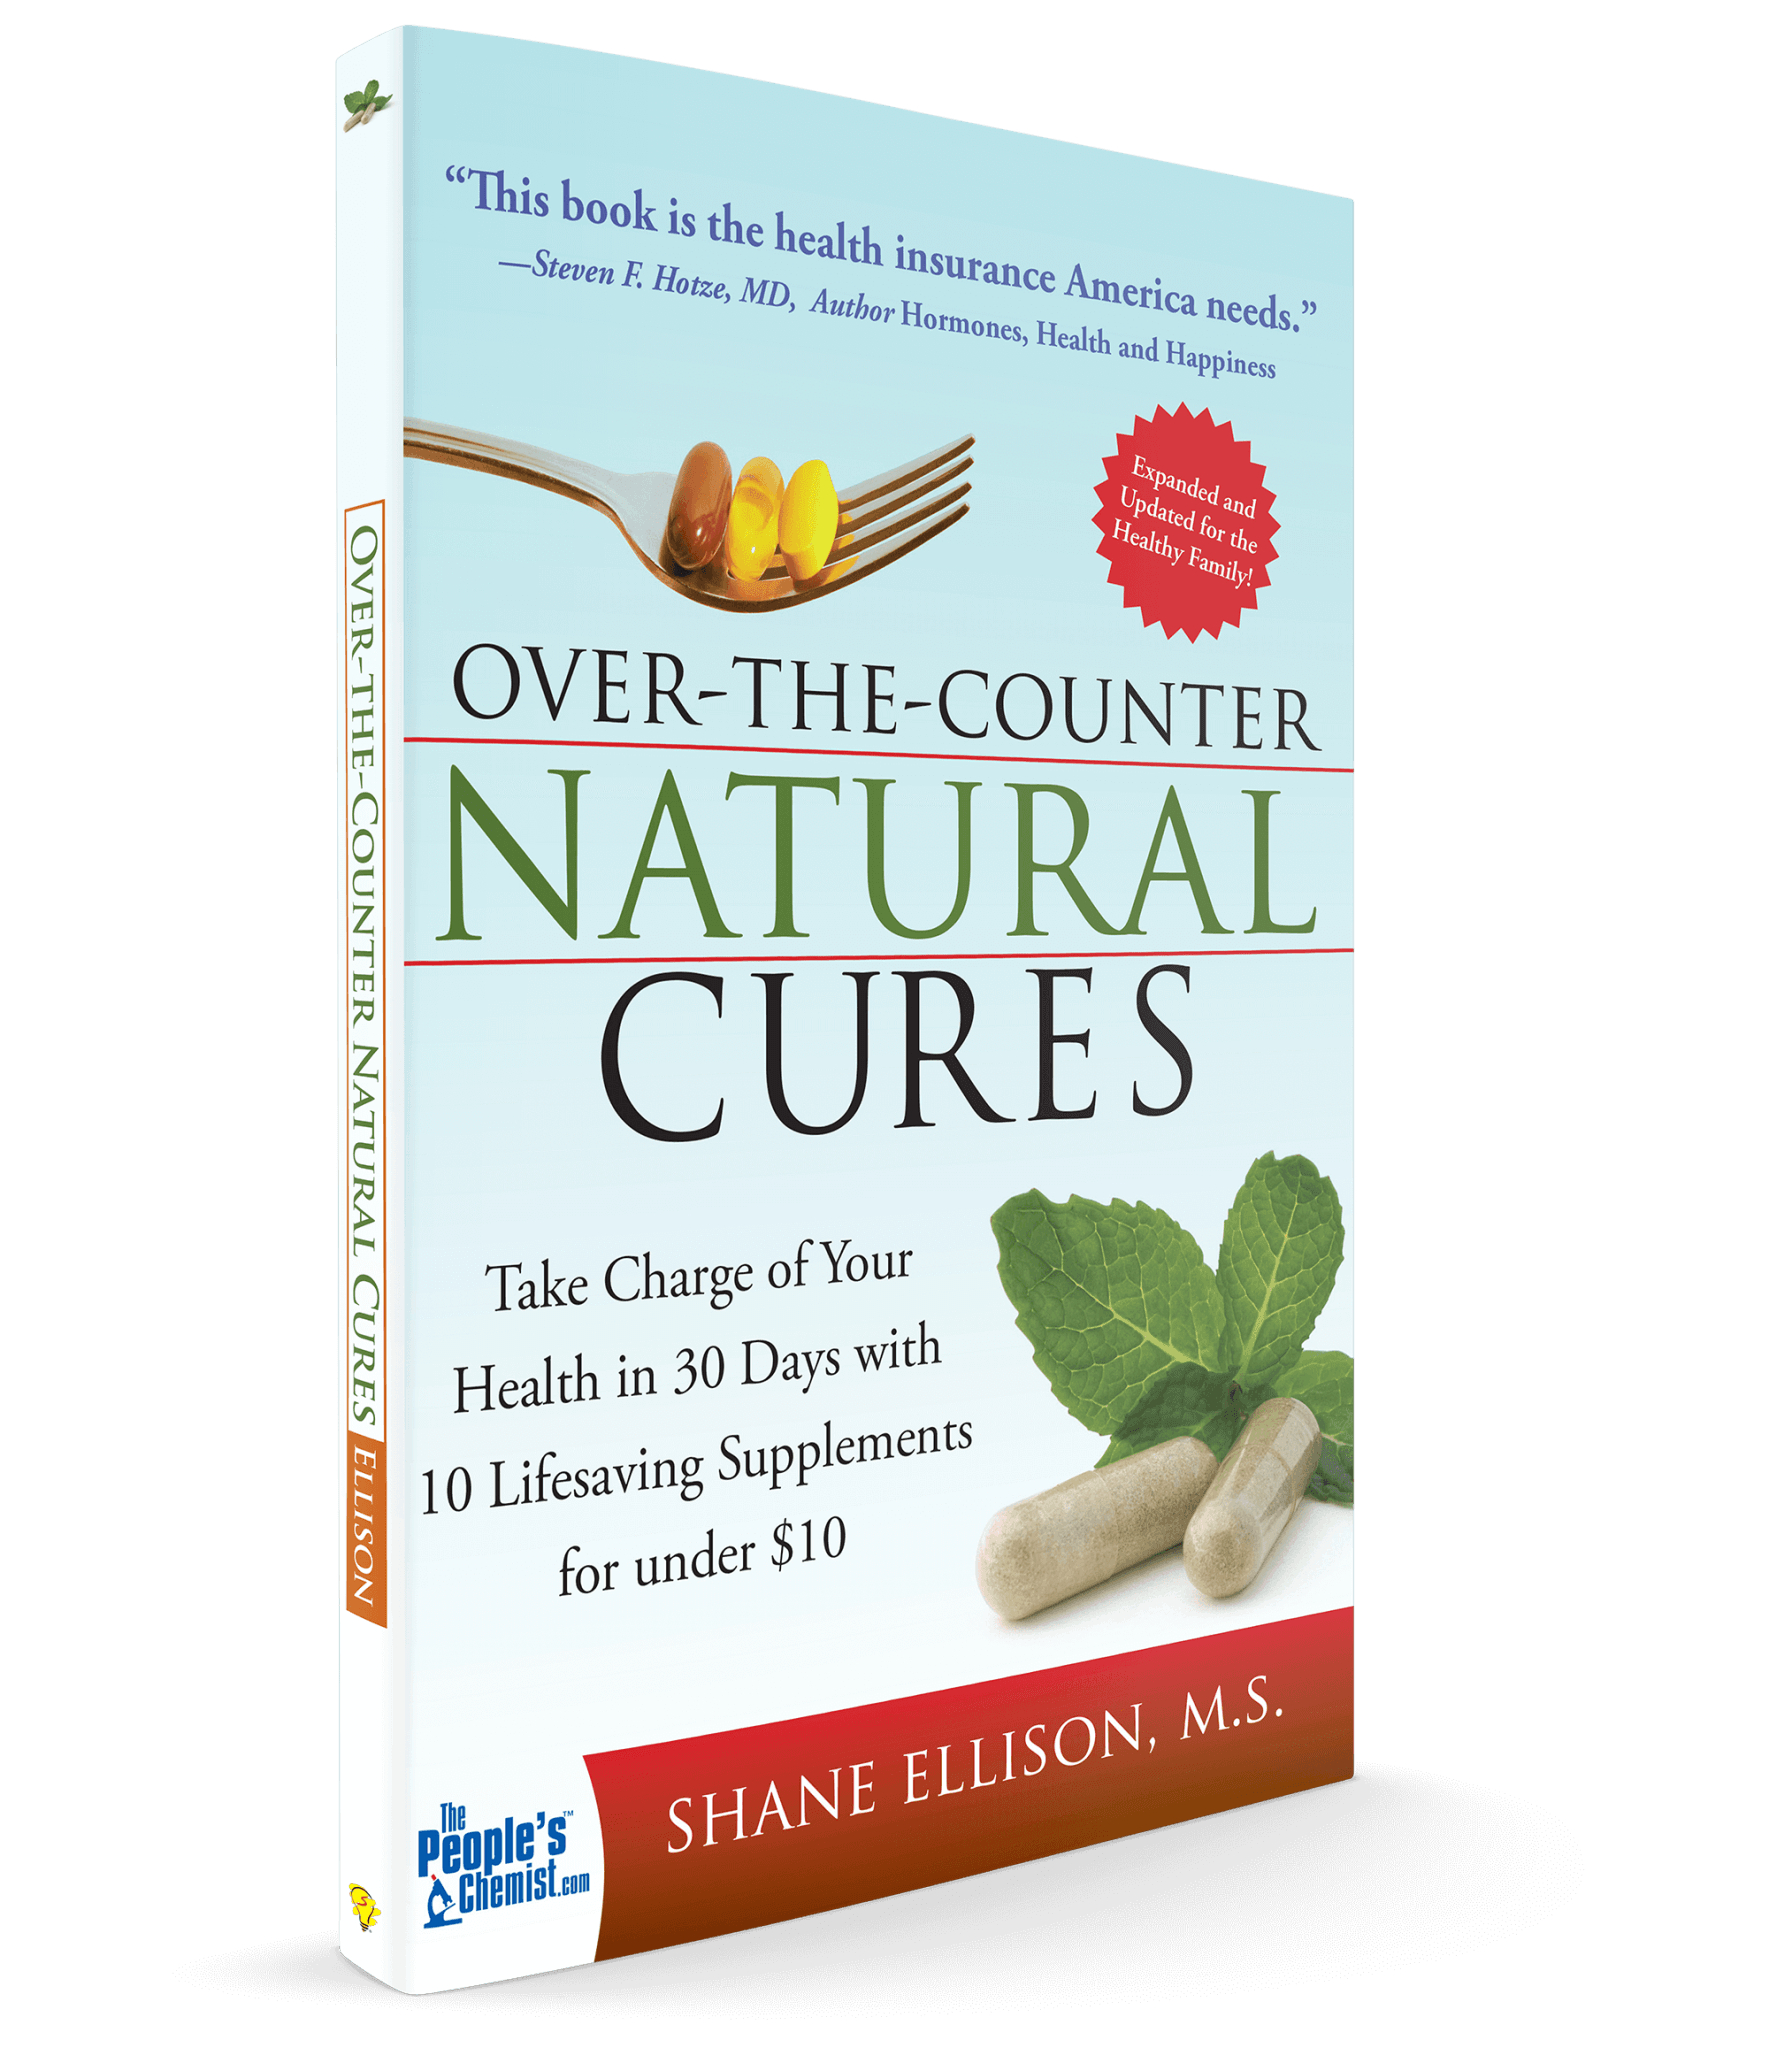 Over-The-Counter Natural Cures - Expanded Edition - Over-The-Counter Natural Cures - Expanded Edition - The People's Chemist - The People's Chemist